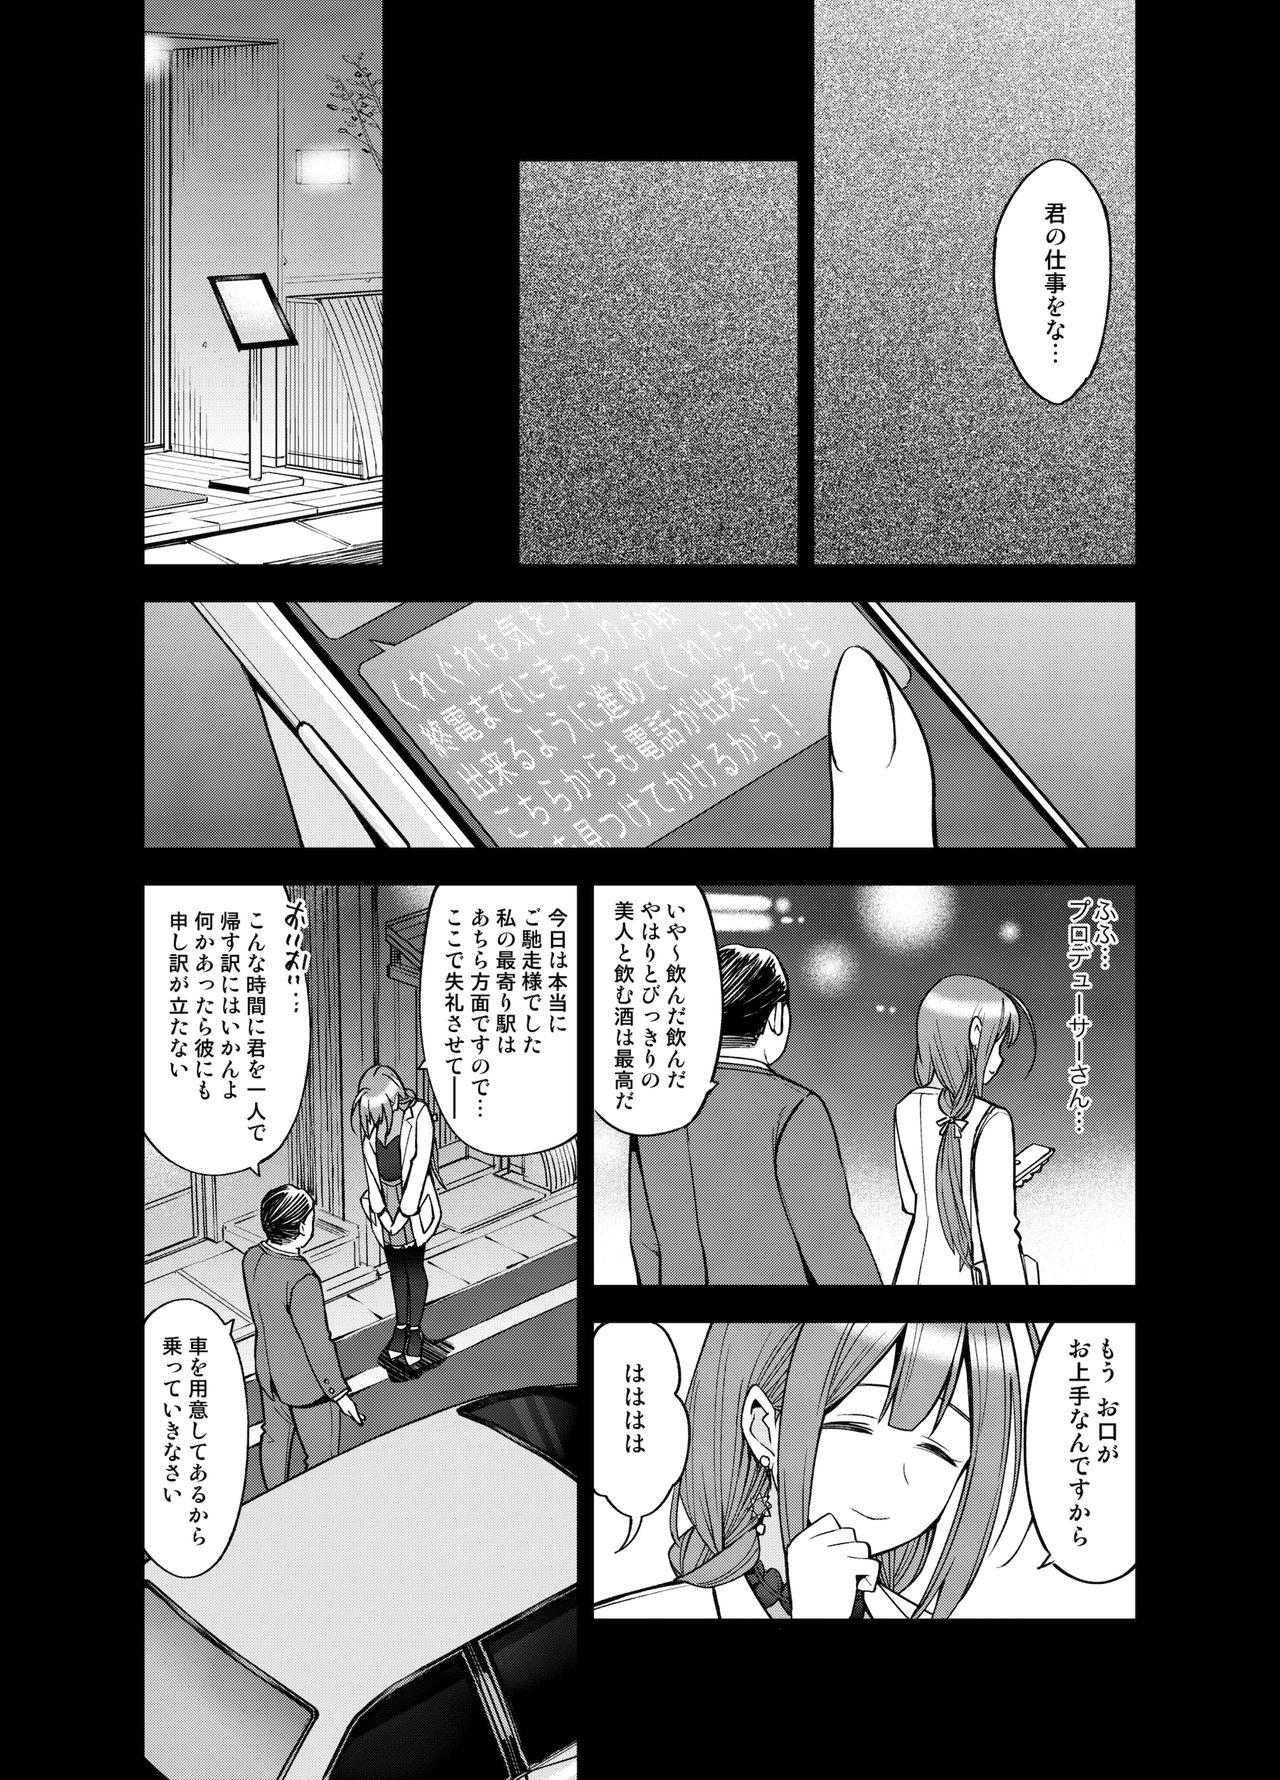 Load Night Blooming - The idolmaster Cuckold - Page 9